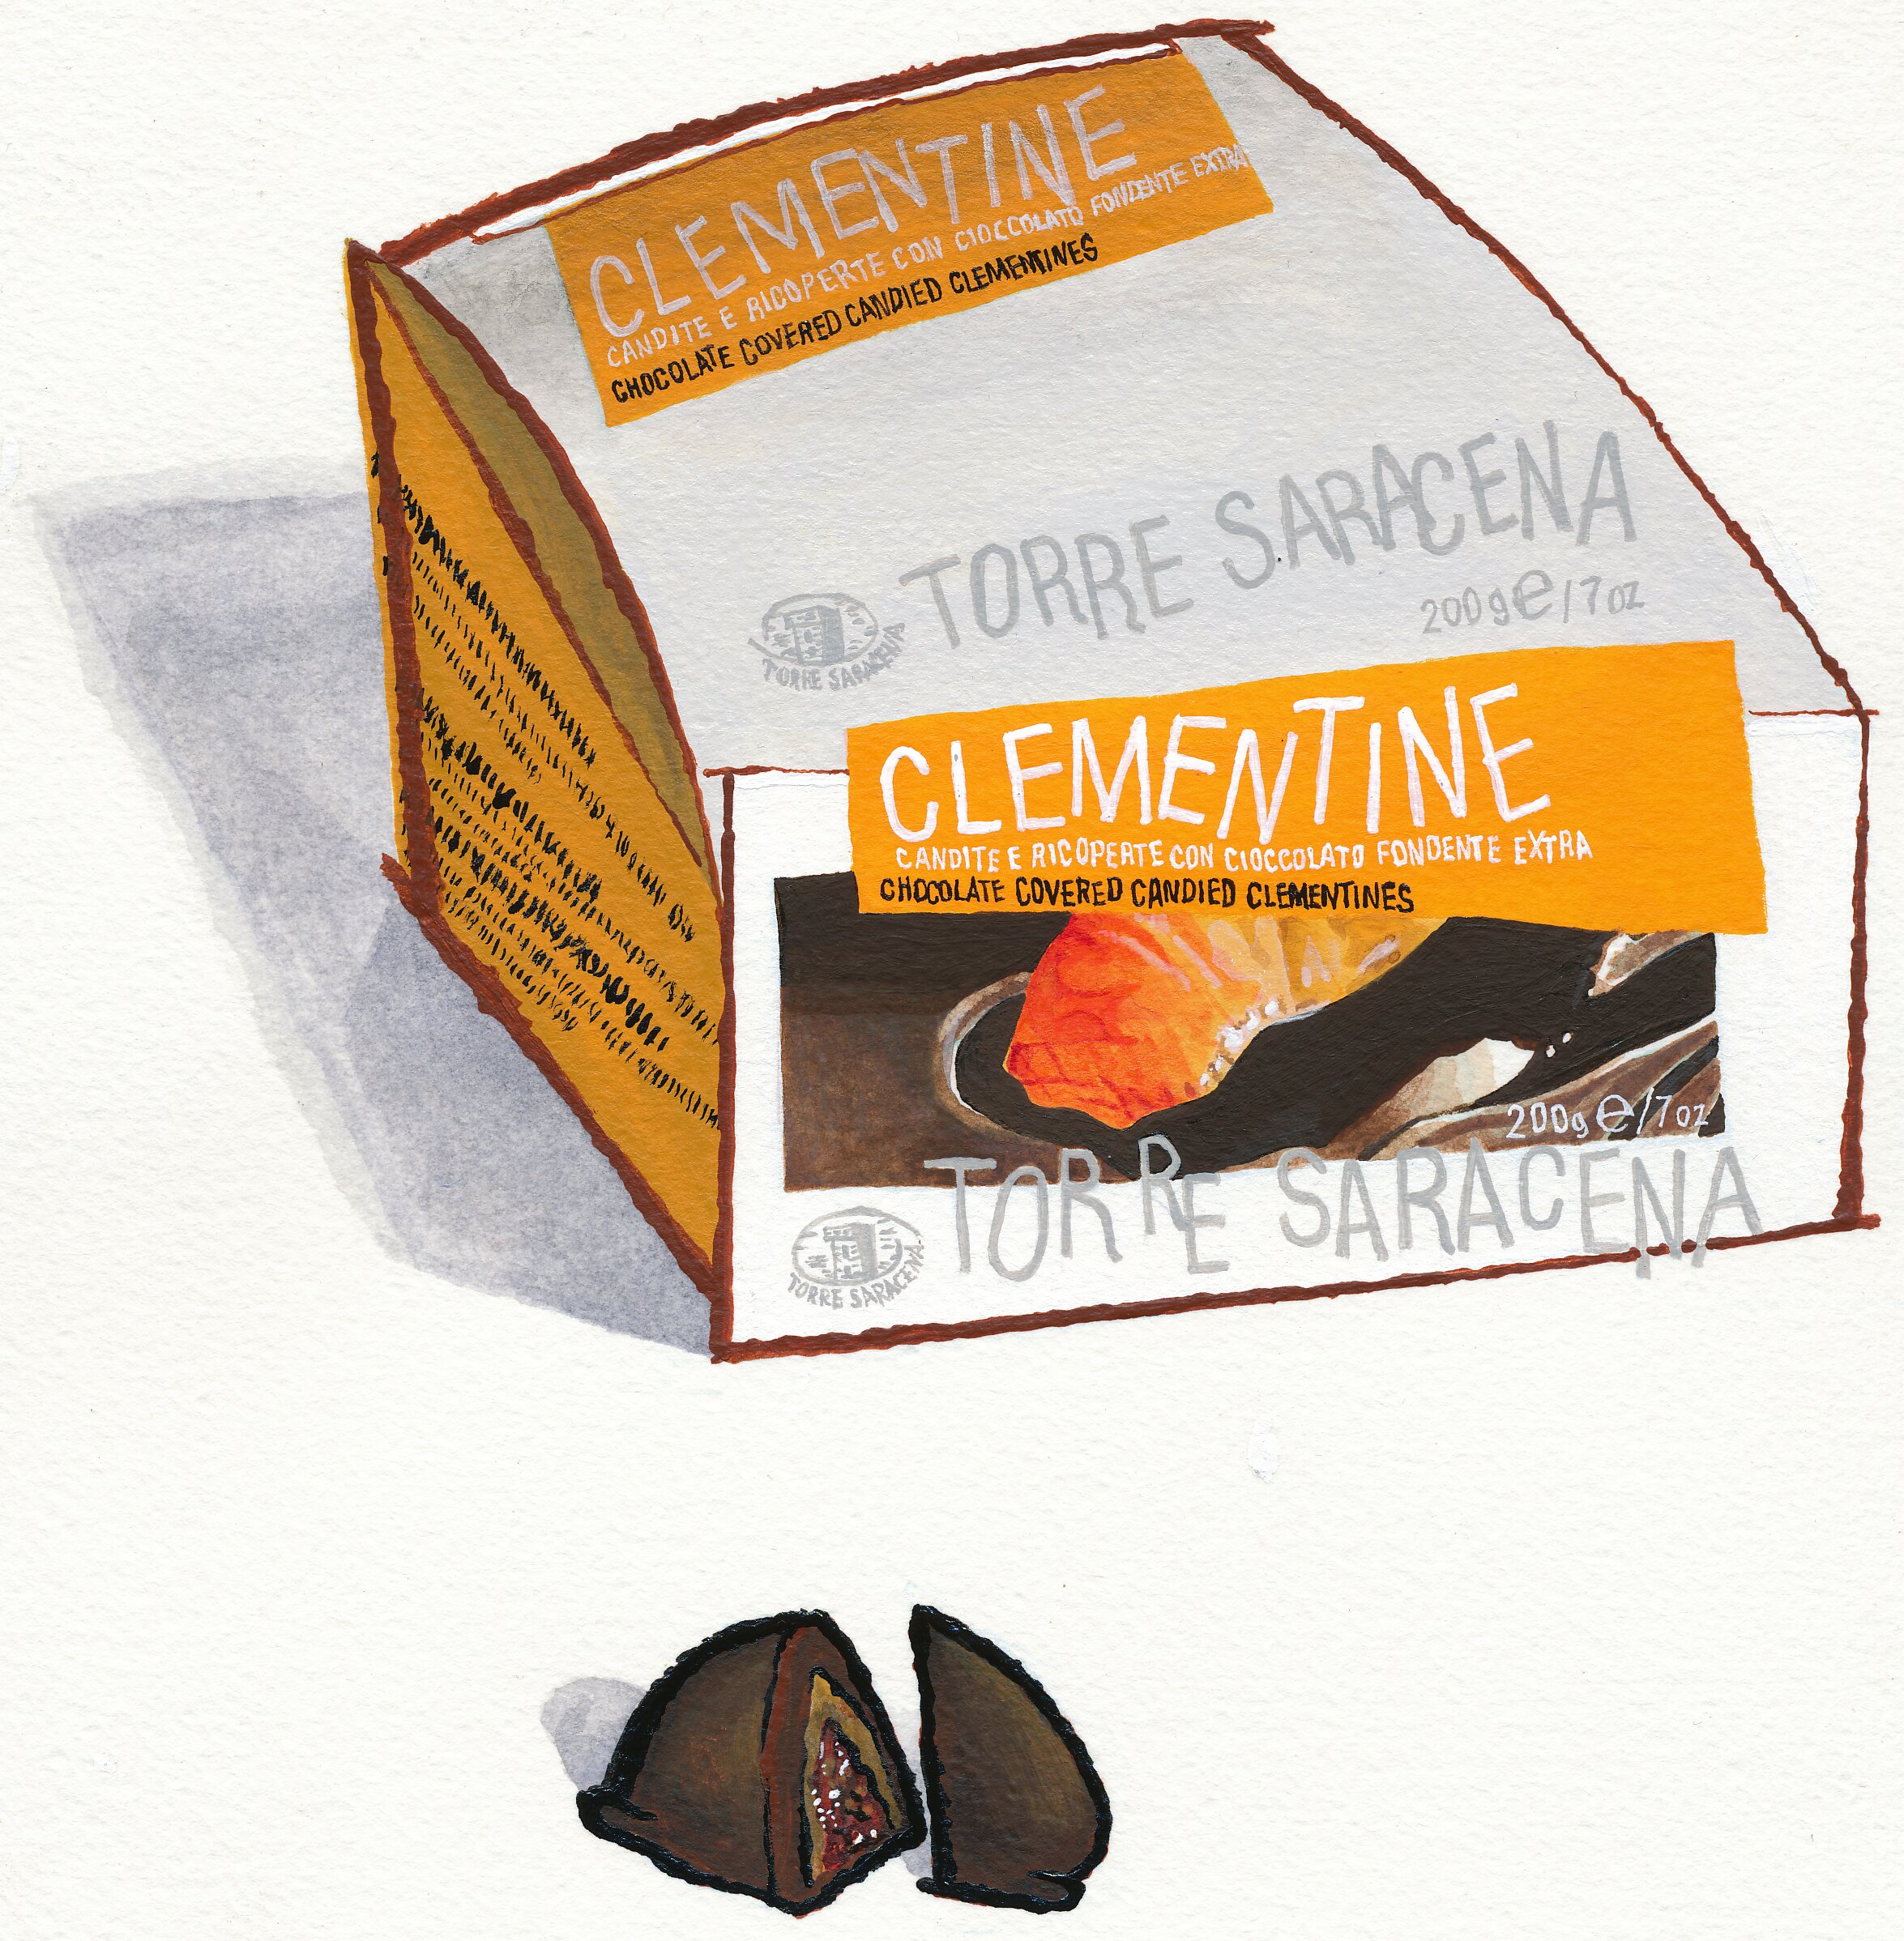 Illustration of a box of chocolate covered clementines